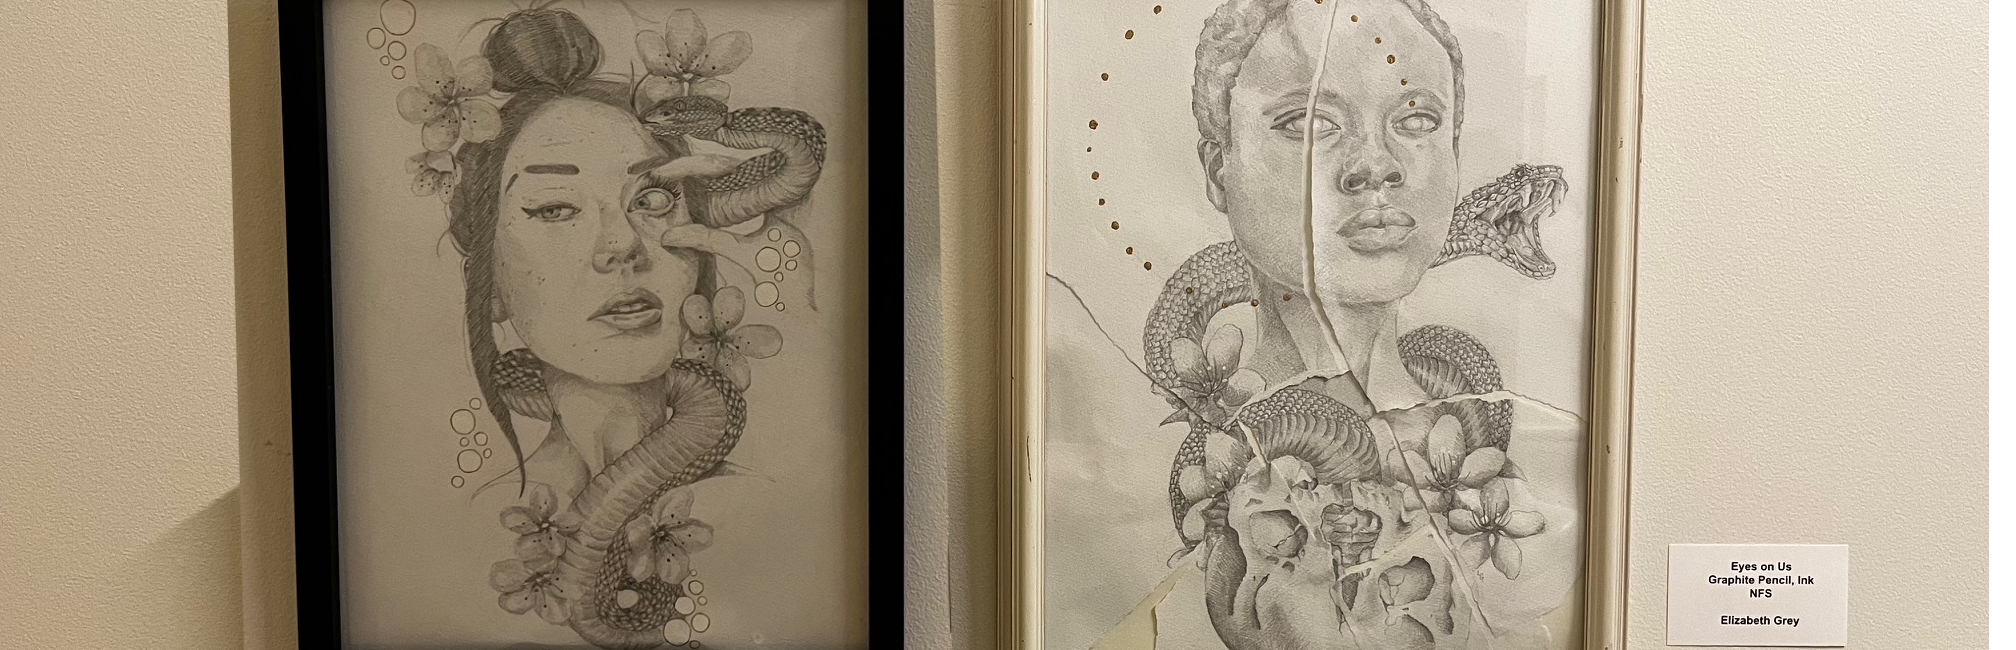 Featured in the Staircase Gallery / "Different Imagination", graphite and ink drawings by Elizabeth Grey